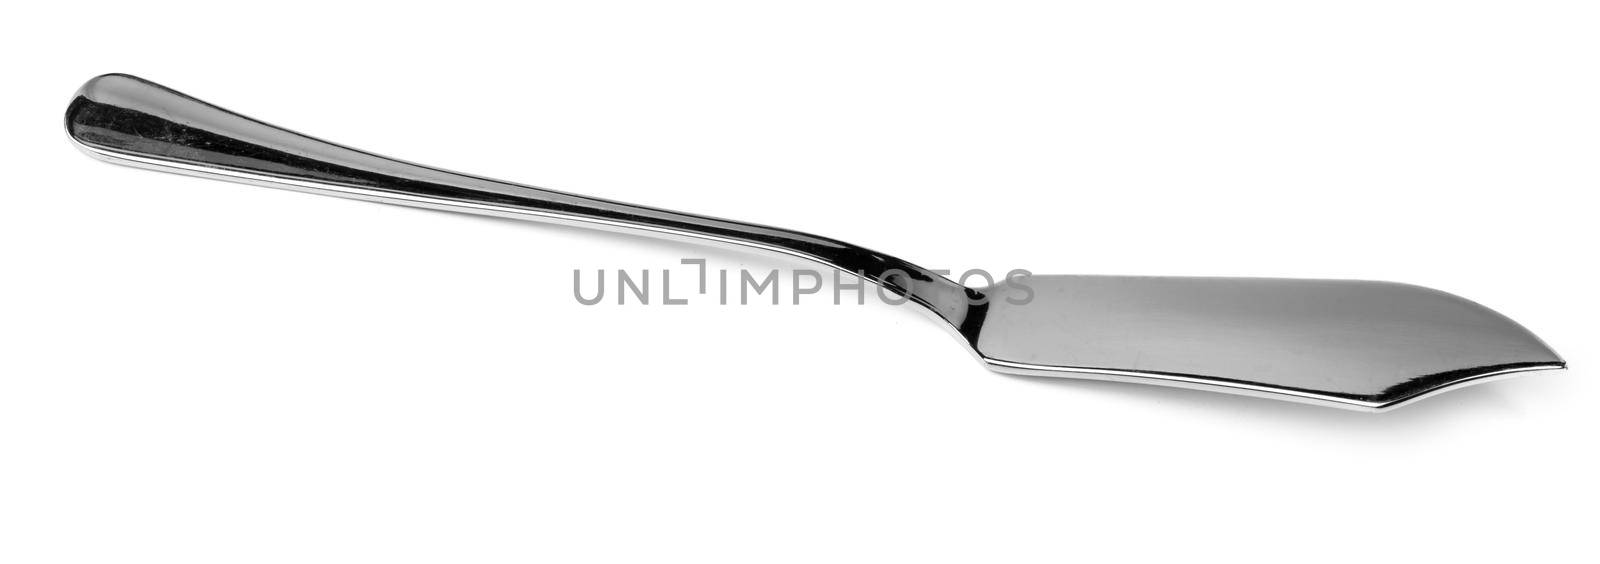 Dining knife for fish isolated on white background by Fabrikasimf